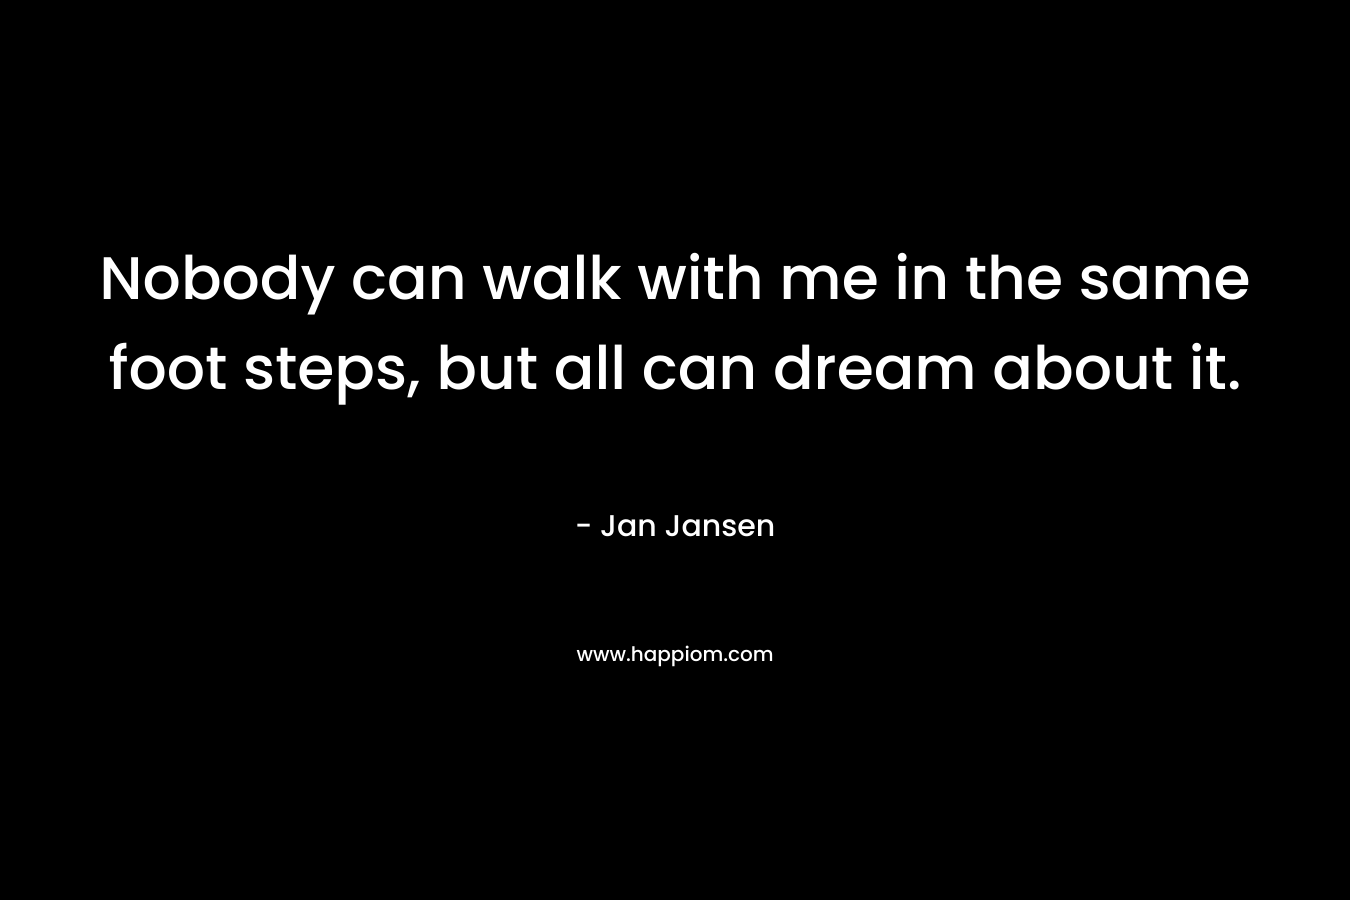 Nobody can walk with me in the same foot steps, but all can dream about it.